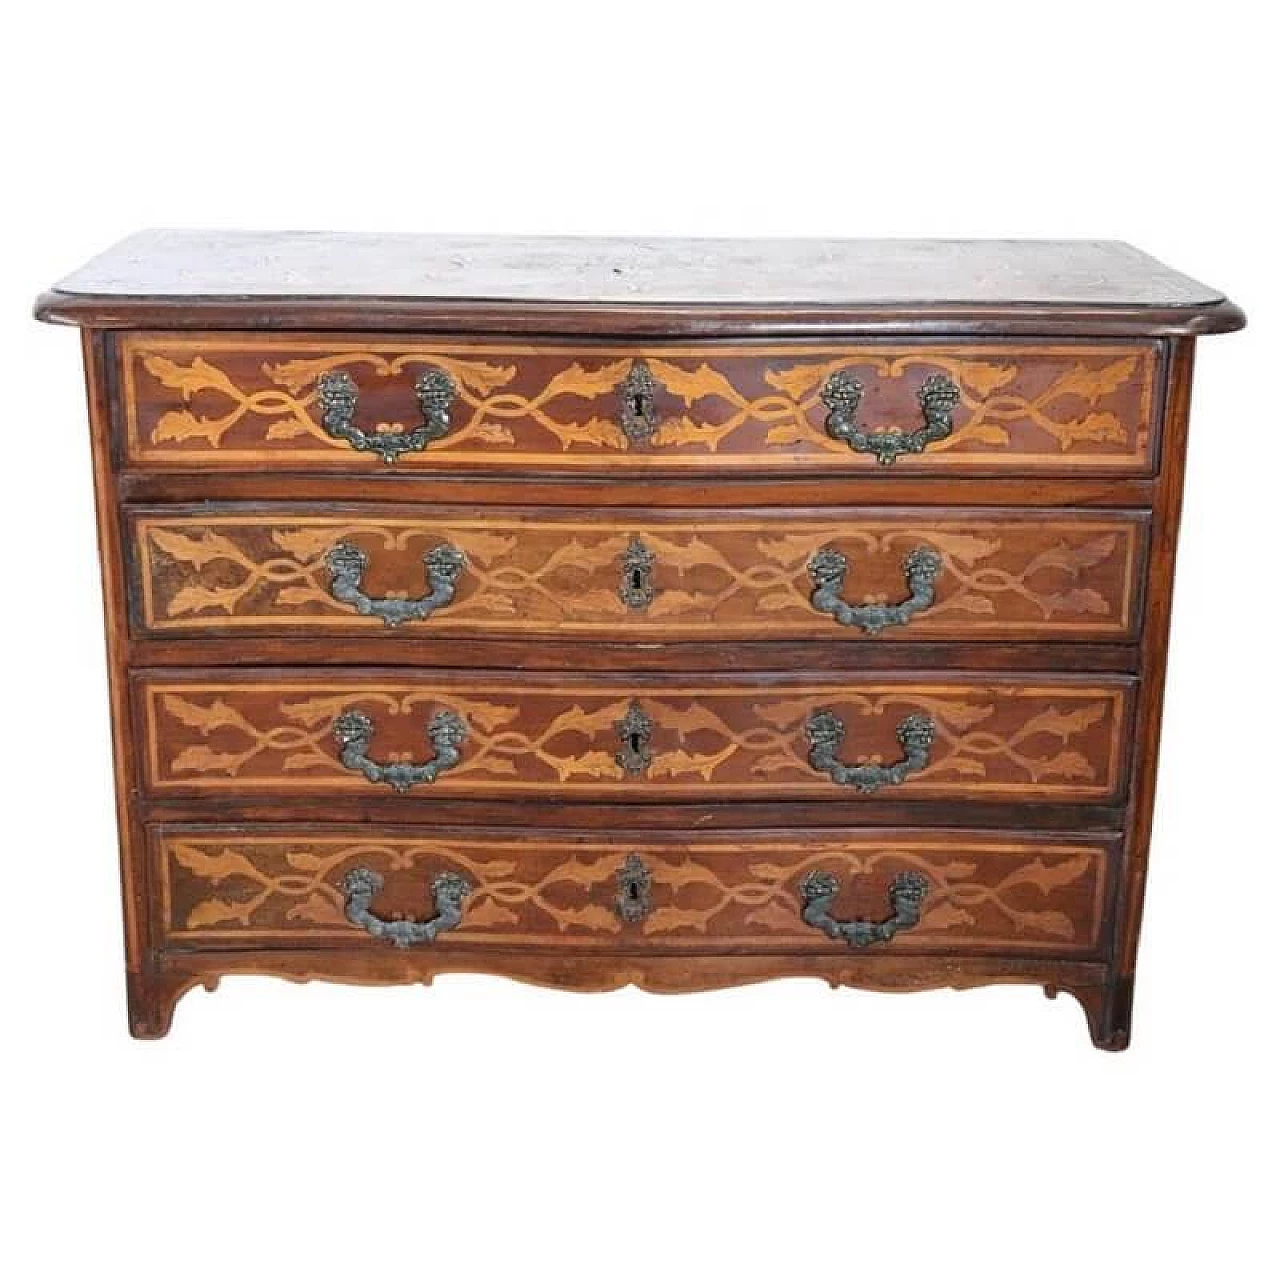 Louis XIV style dresser in precious wood inlay, 17th century 1